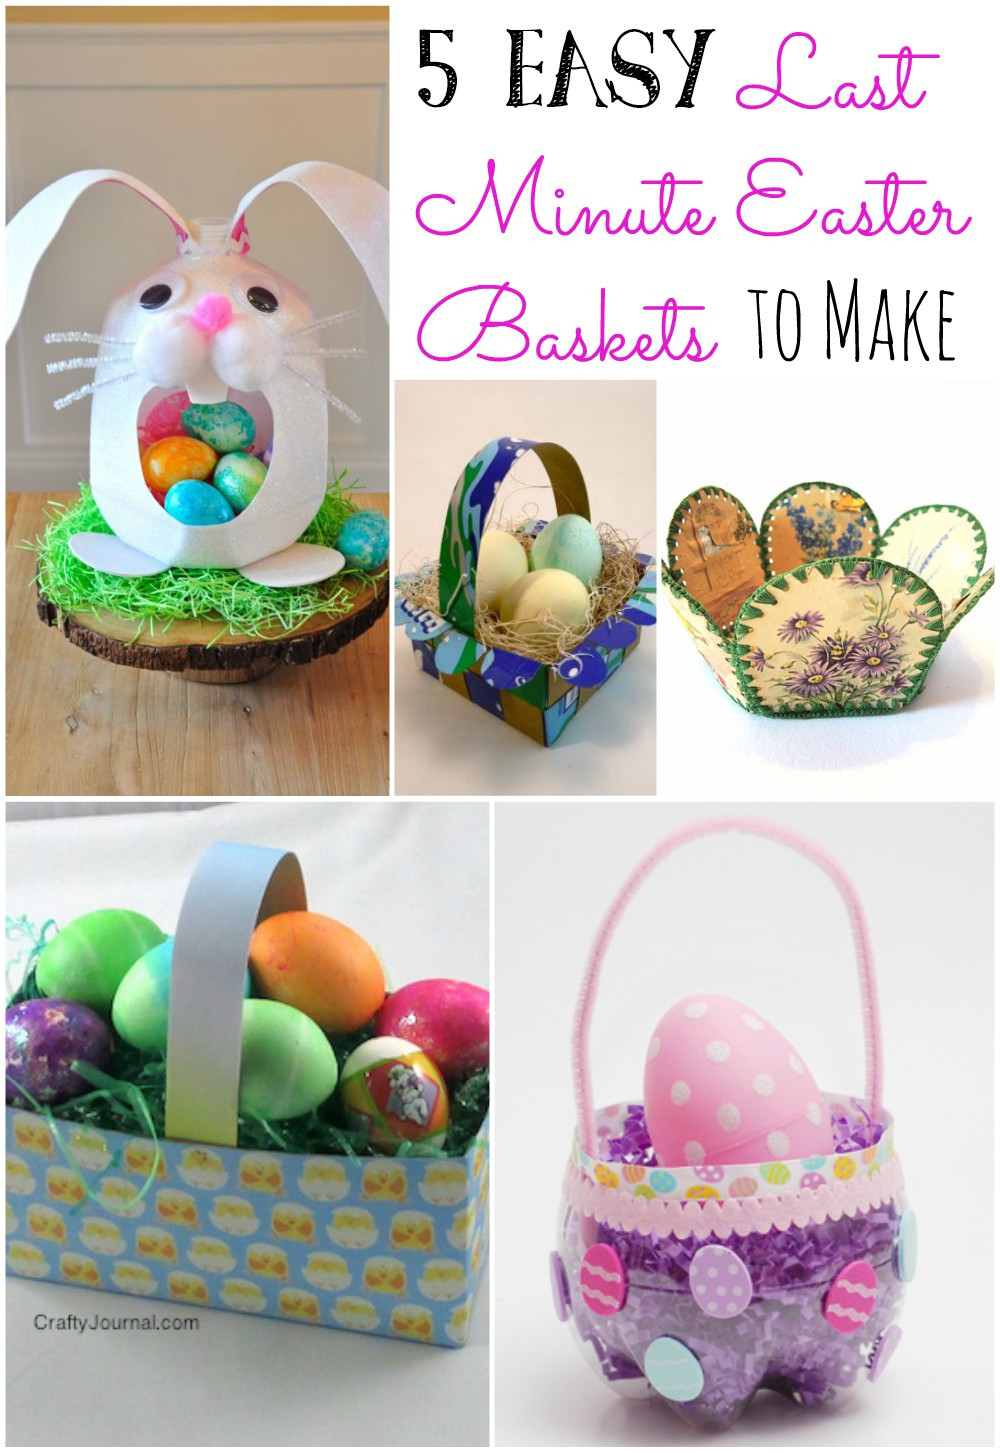 Last Minute Easter Gifts
 5 Easy Last Minute Easter Baskets to Make Little